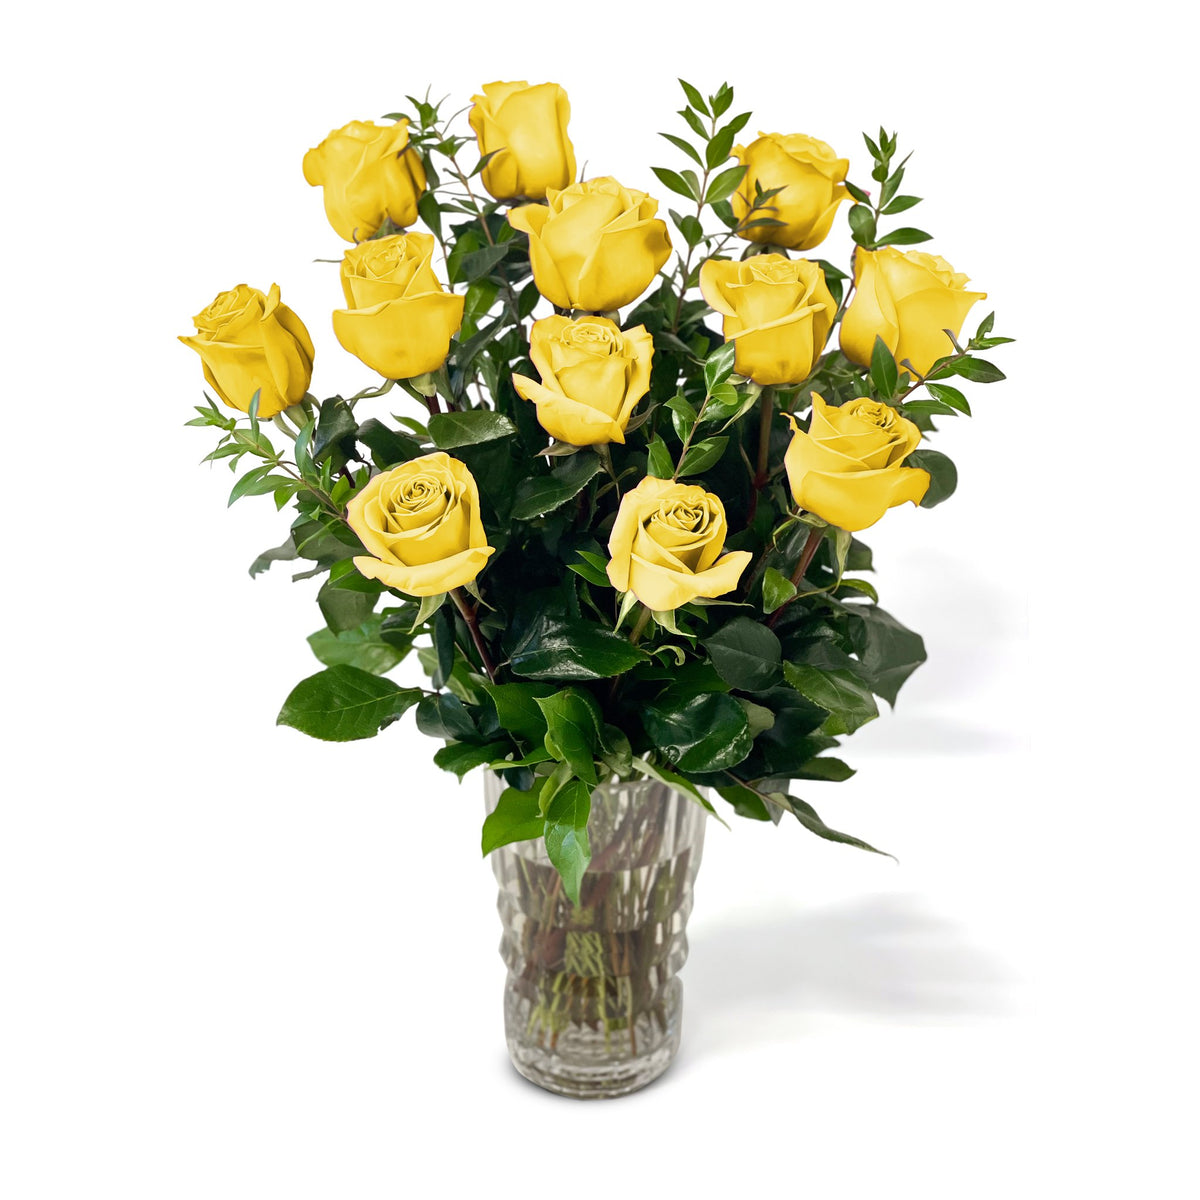 NYC Flower Delivery - Fresh Roses in a Crystal Vase | Dozen Yellow - Roses